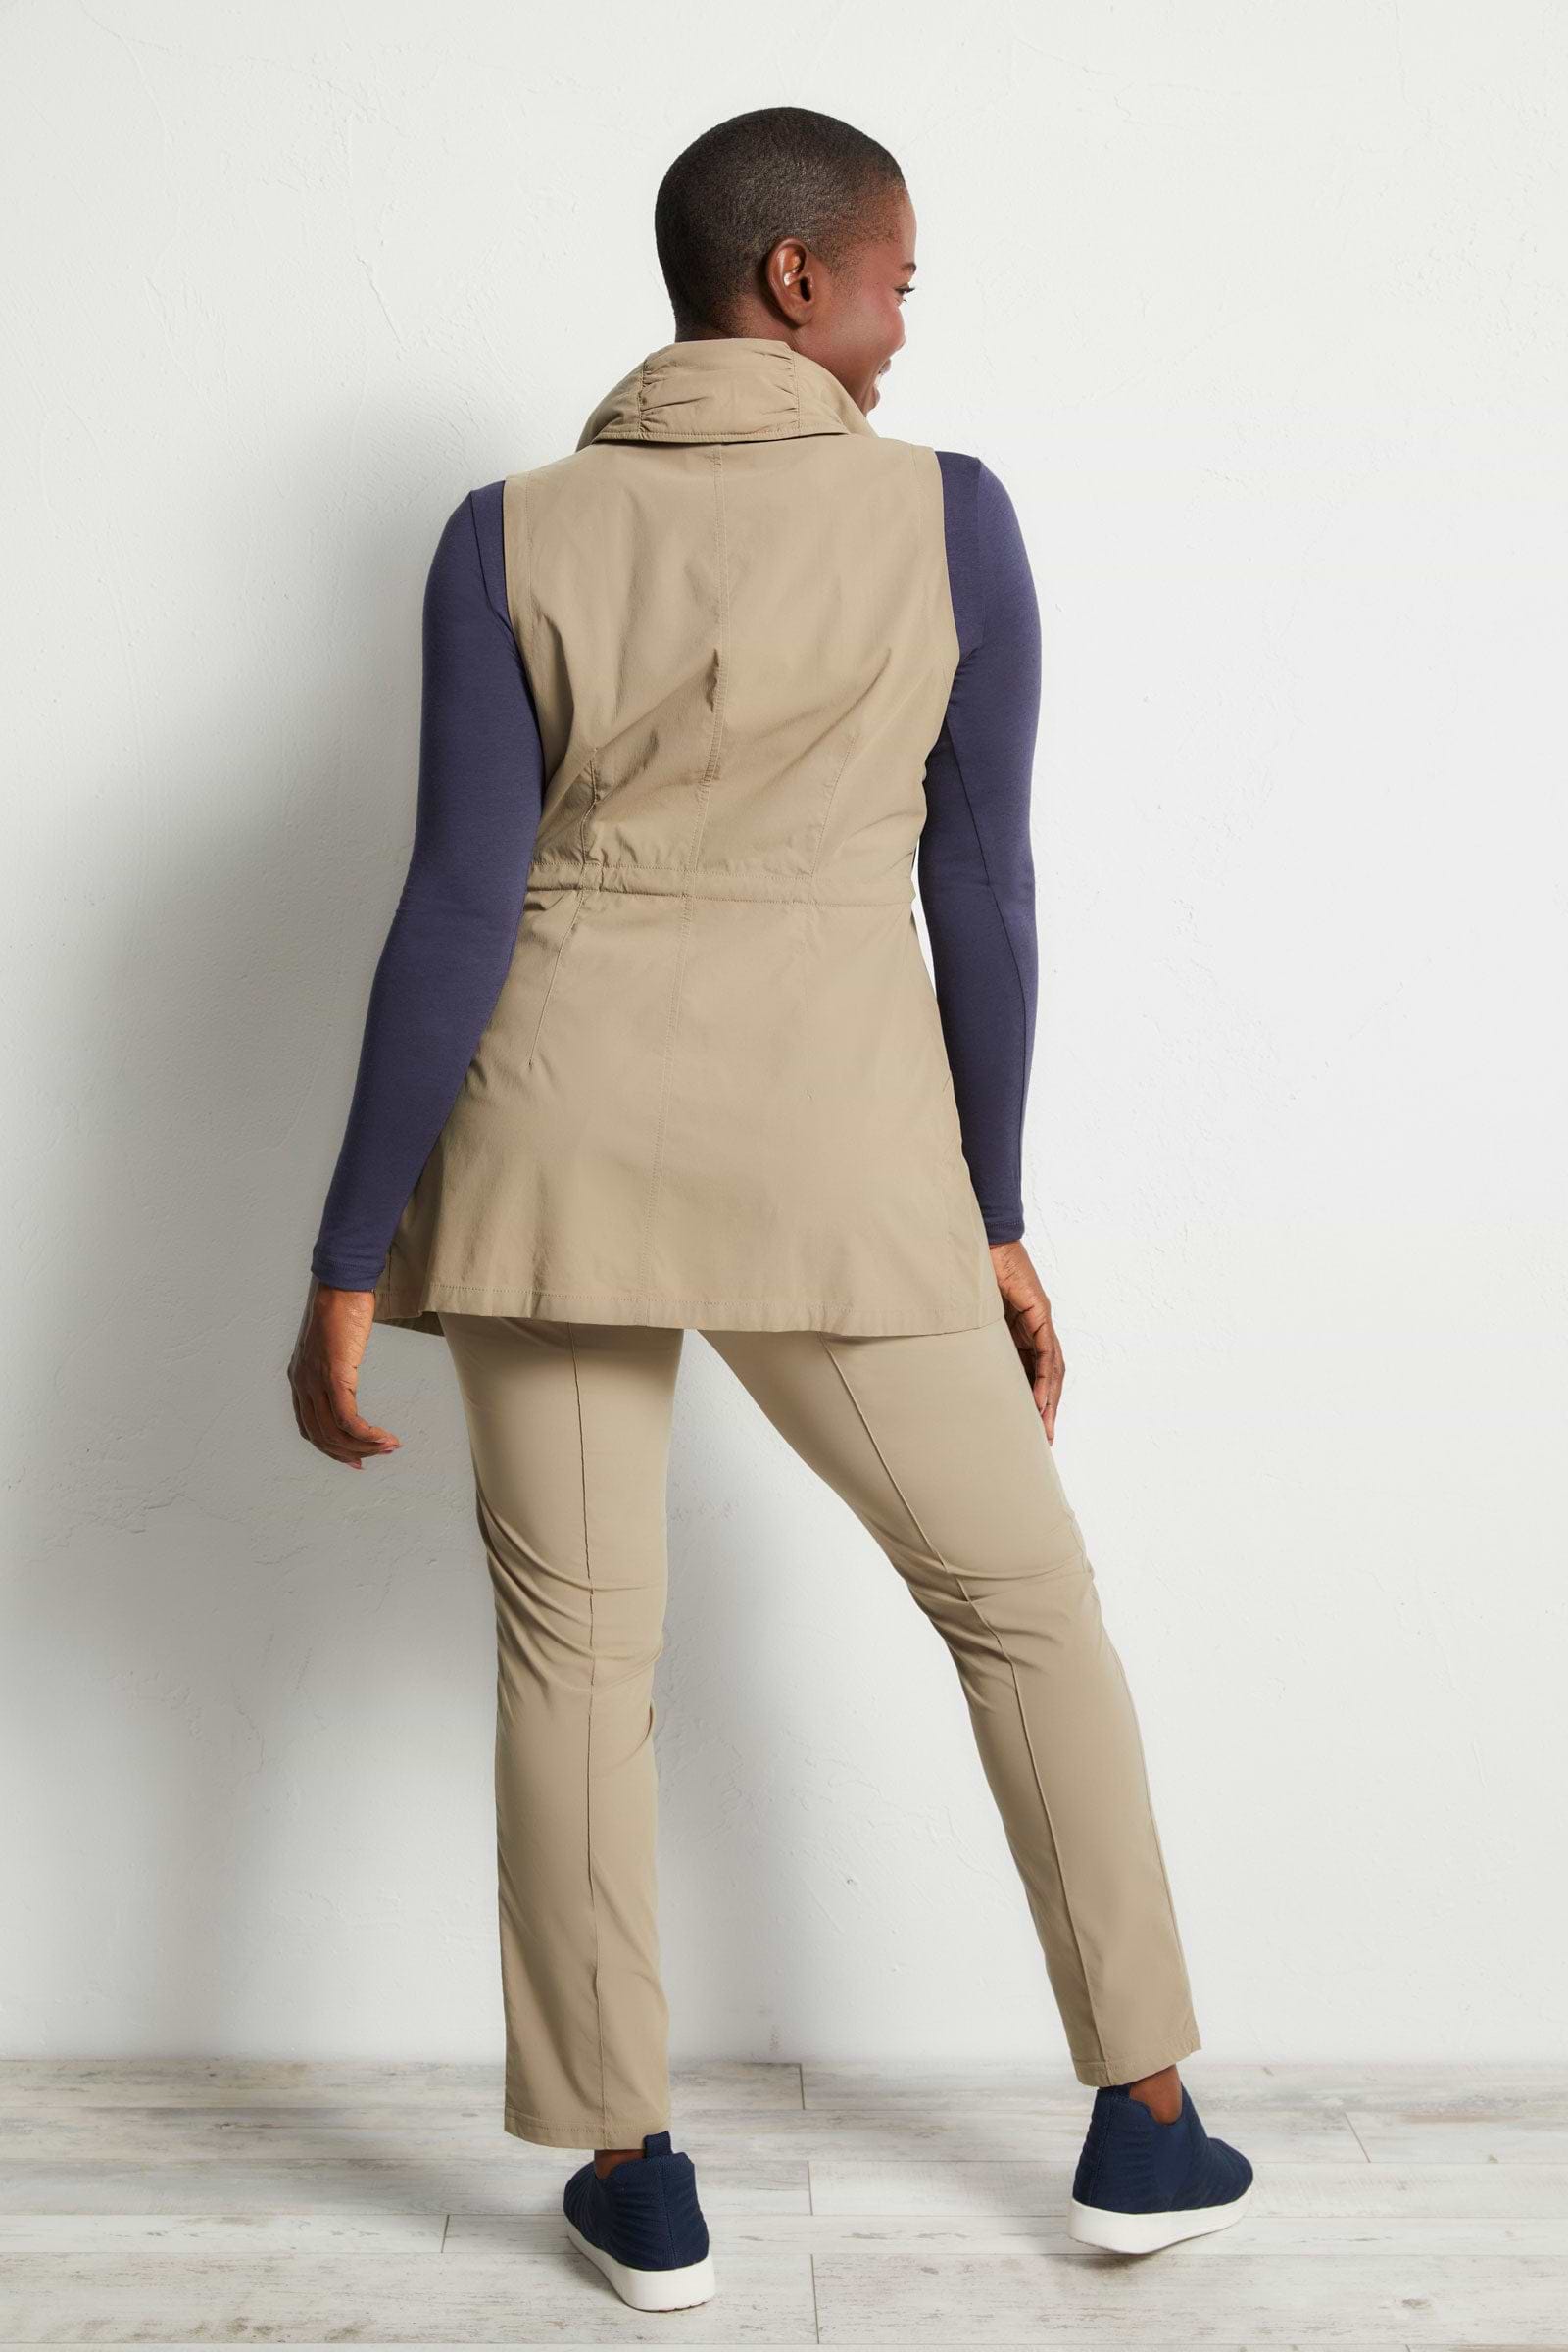 The Best Travel Vest. Woman Showing the Back Profile of a Delaney Travel Vest in Khaki